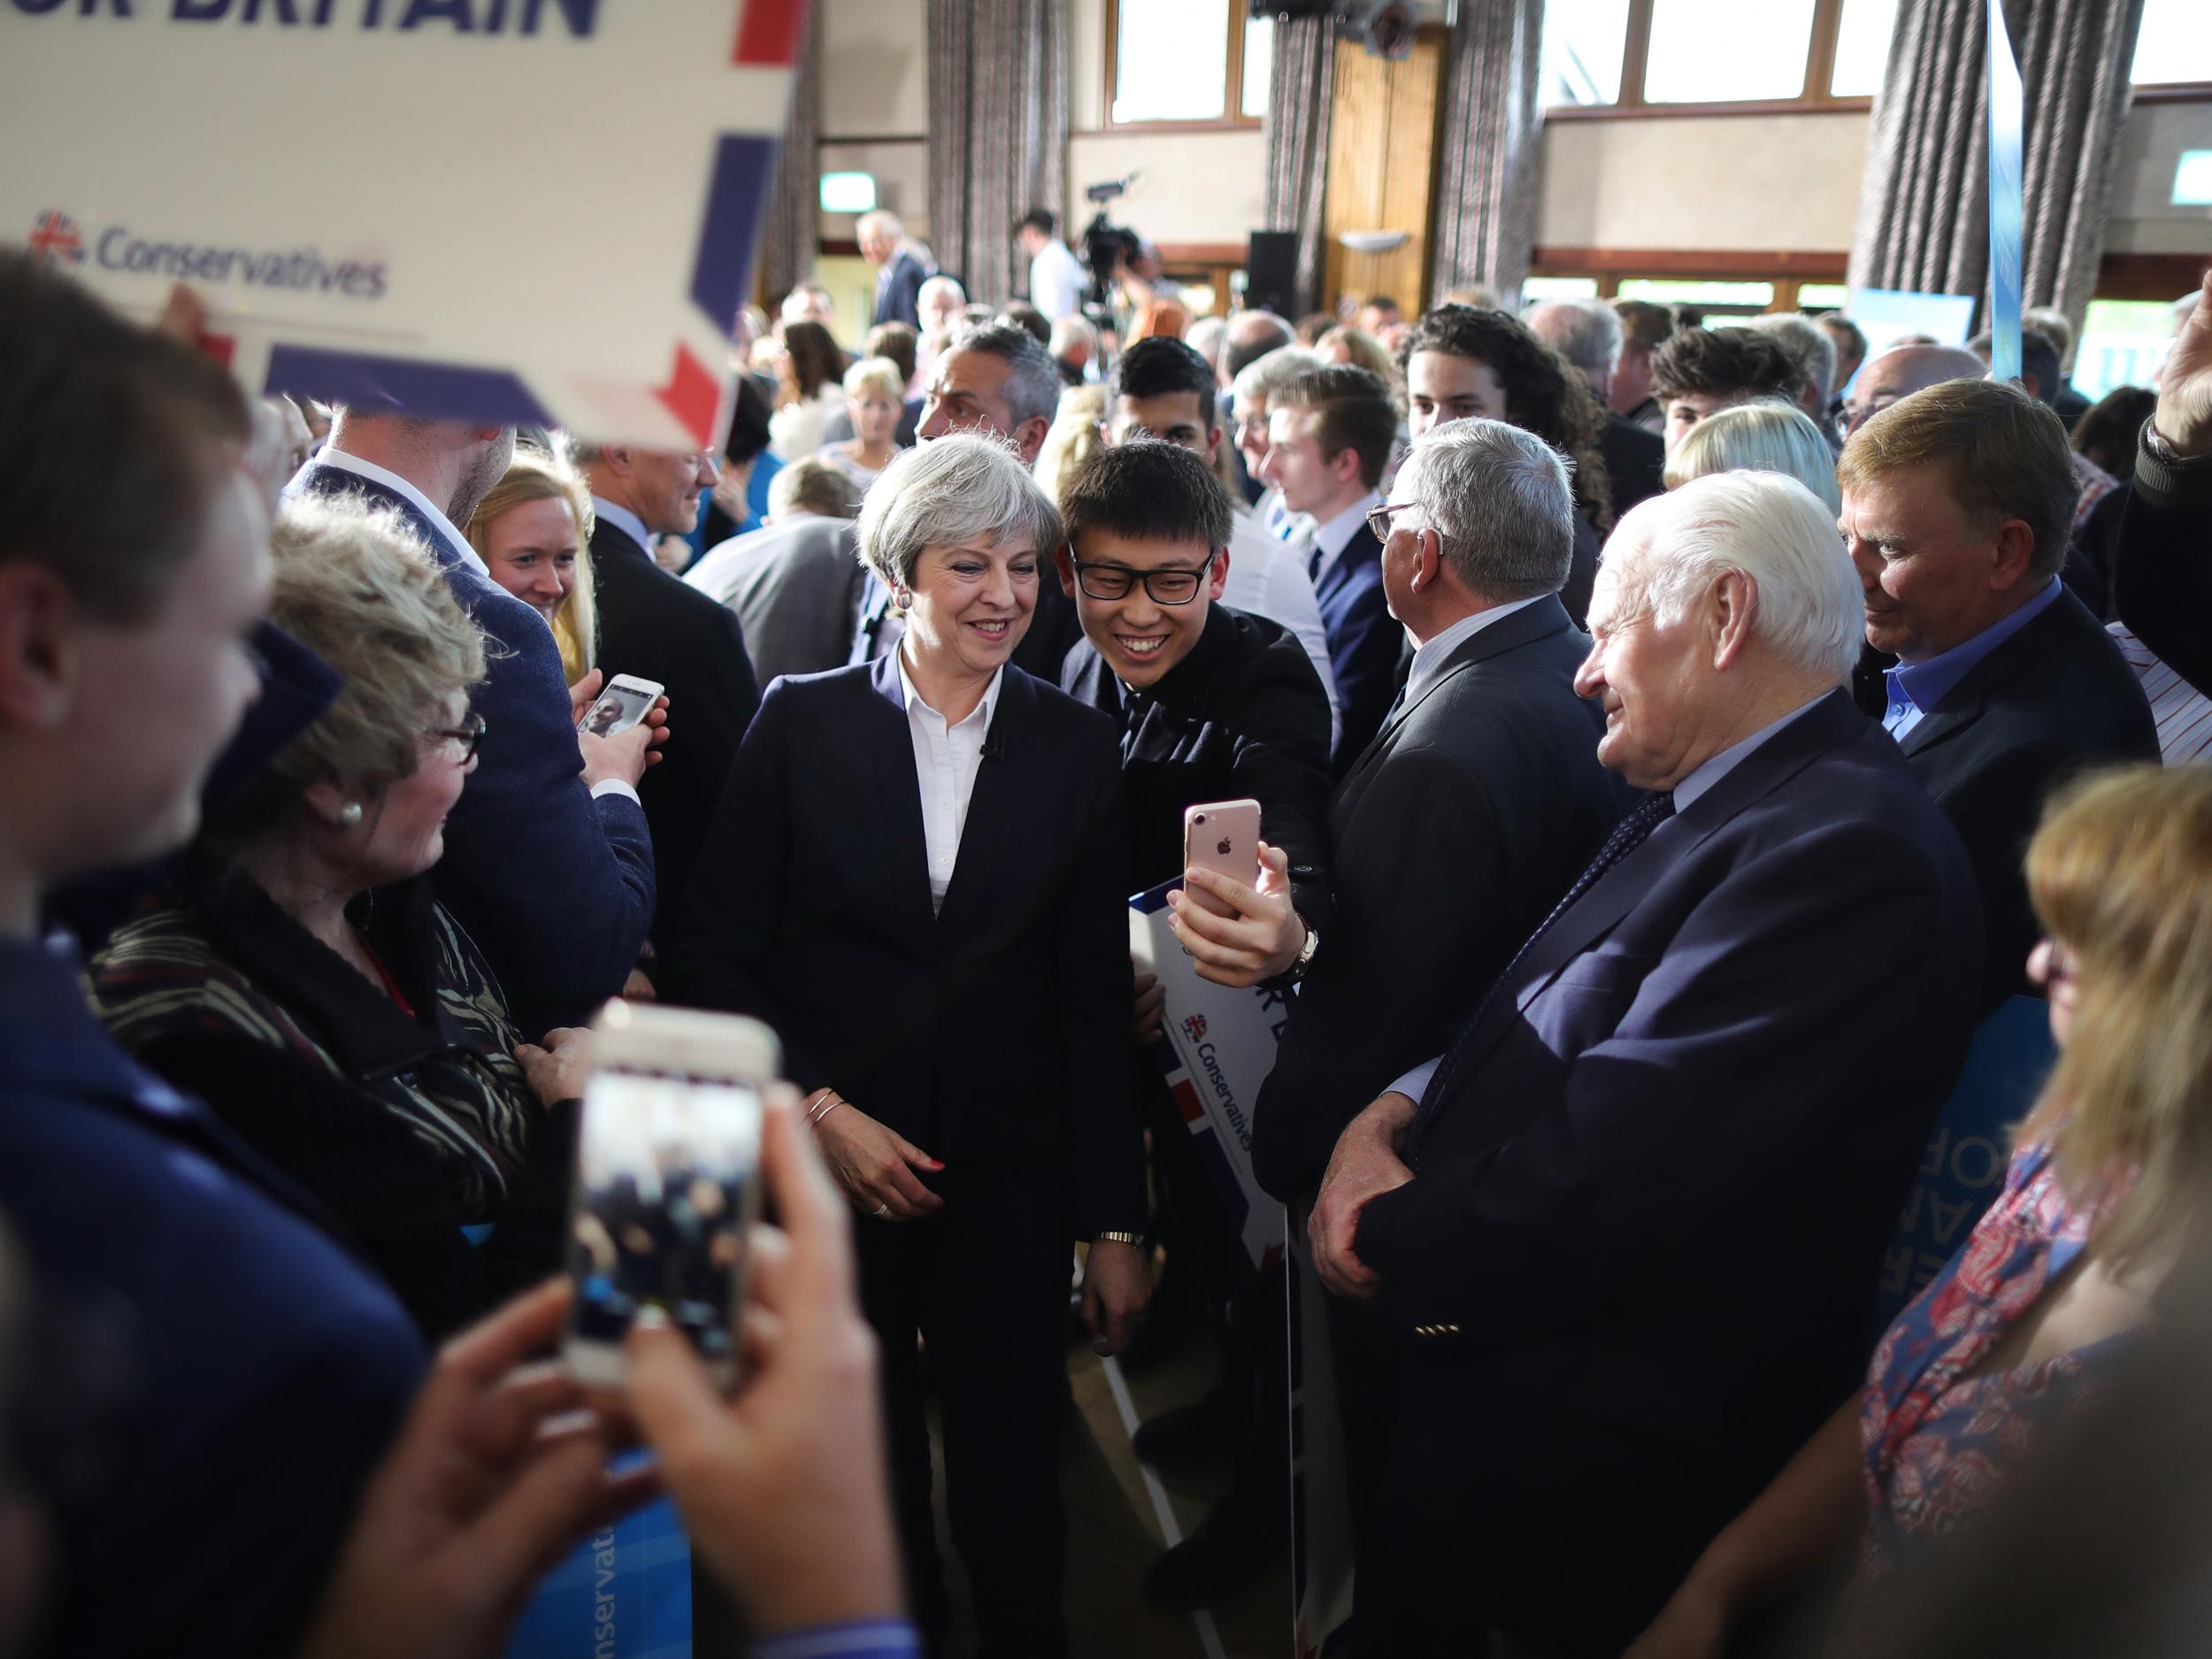 Even Theresa May gets stopped by fans for selfies